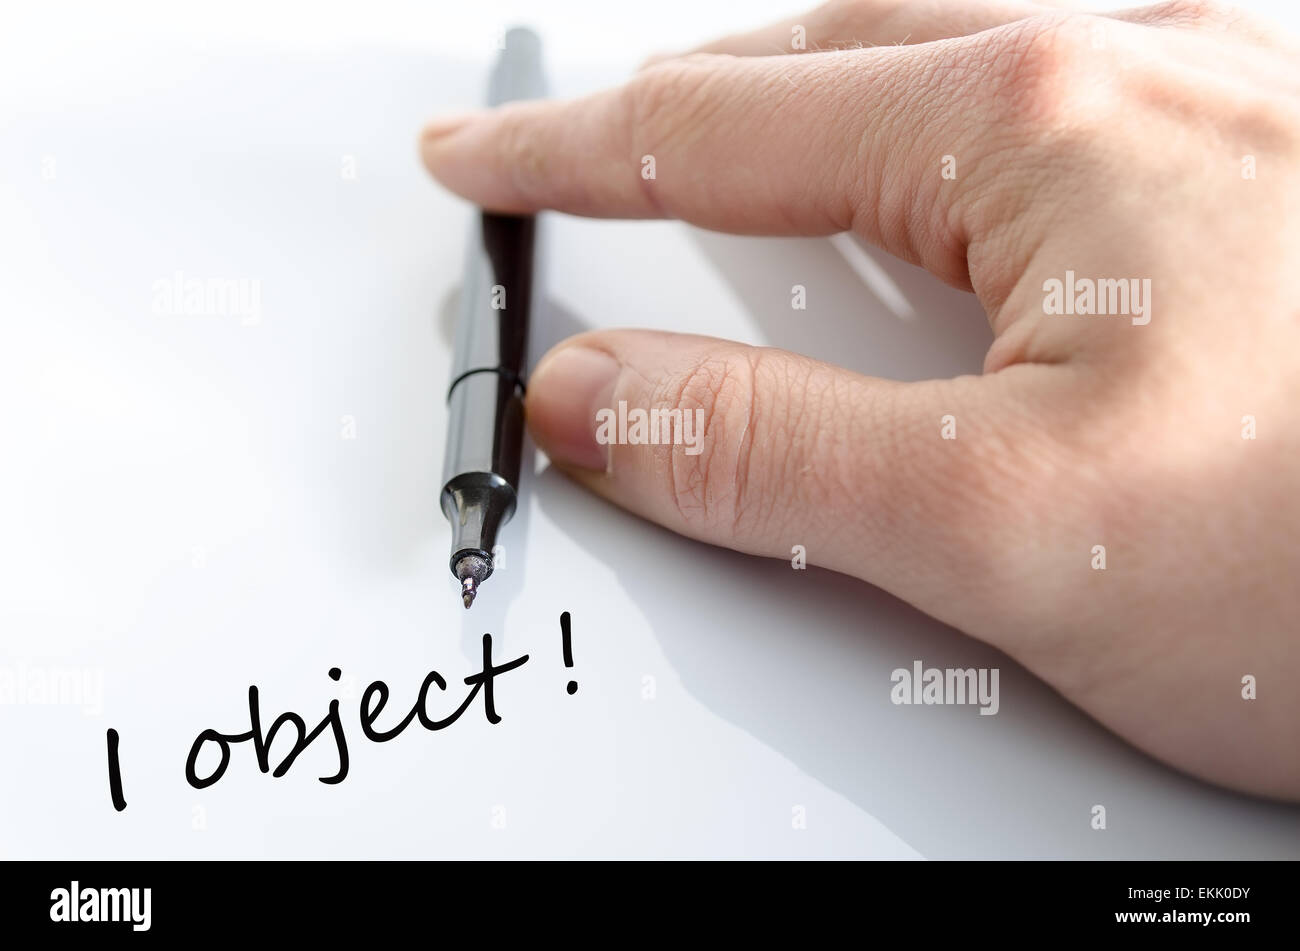 I Object Concept Over White Background Stock Photo